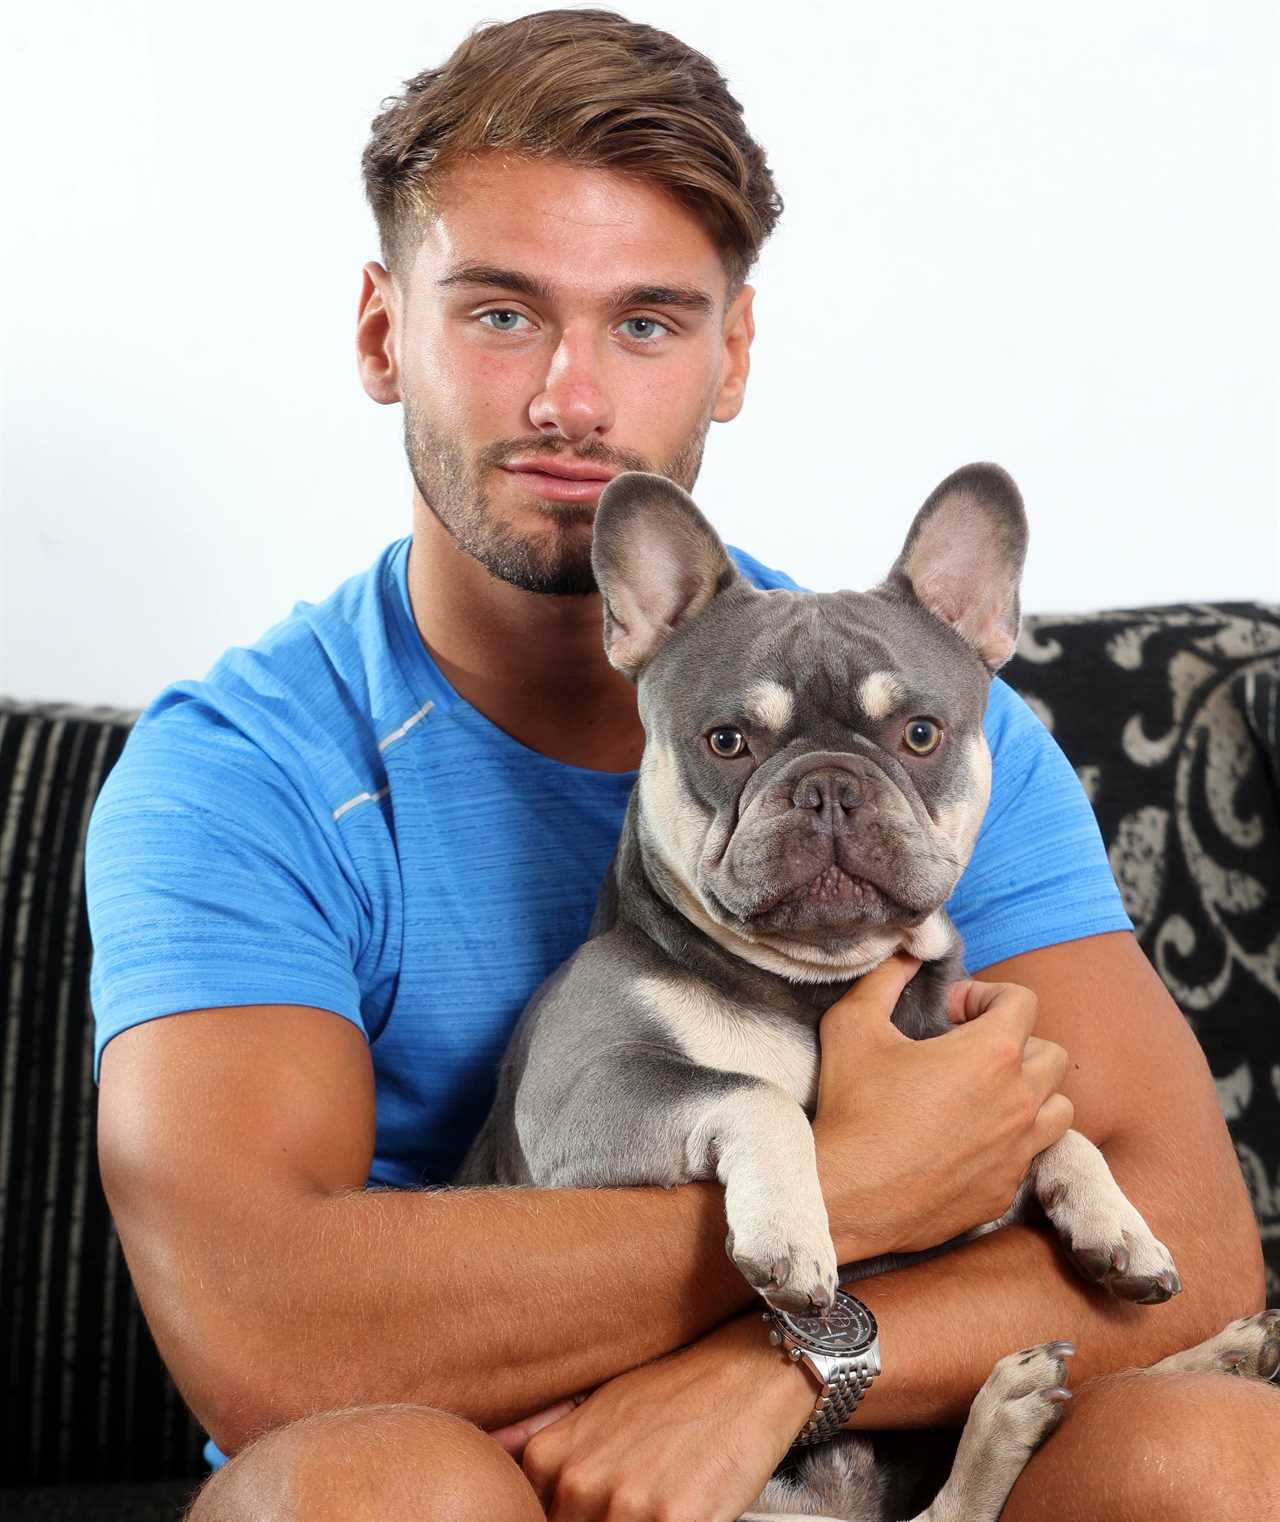 Love Island’s Jacques O’Neill and his mother received death threats and she was forced to move out of her home